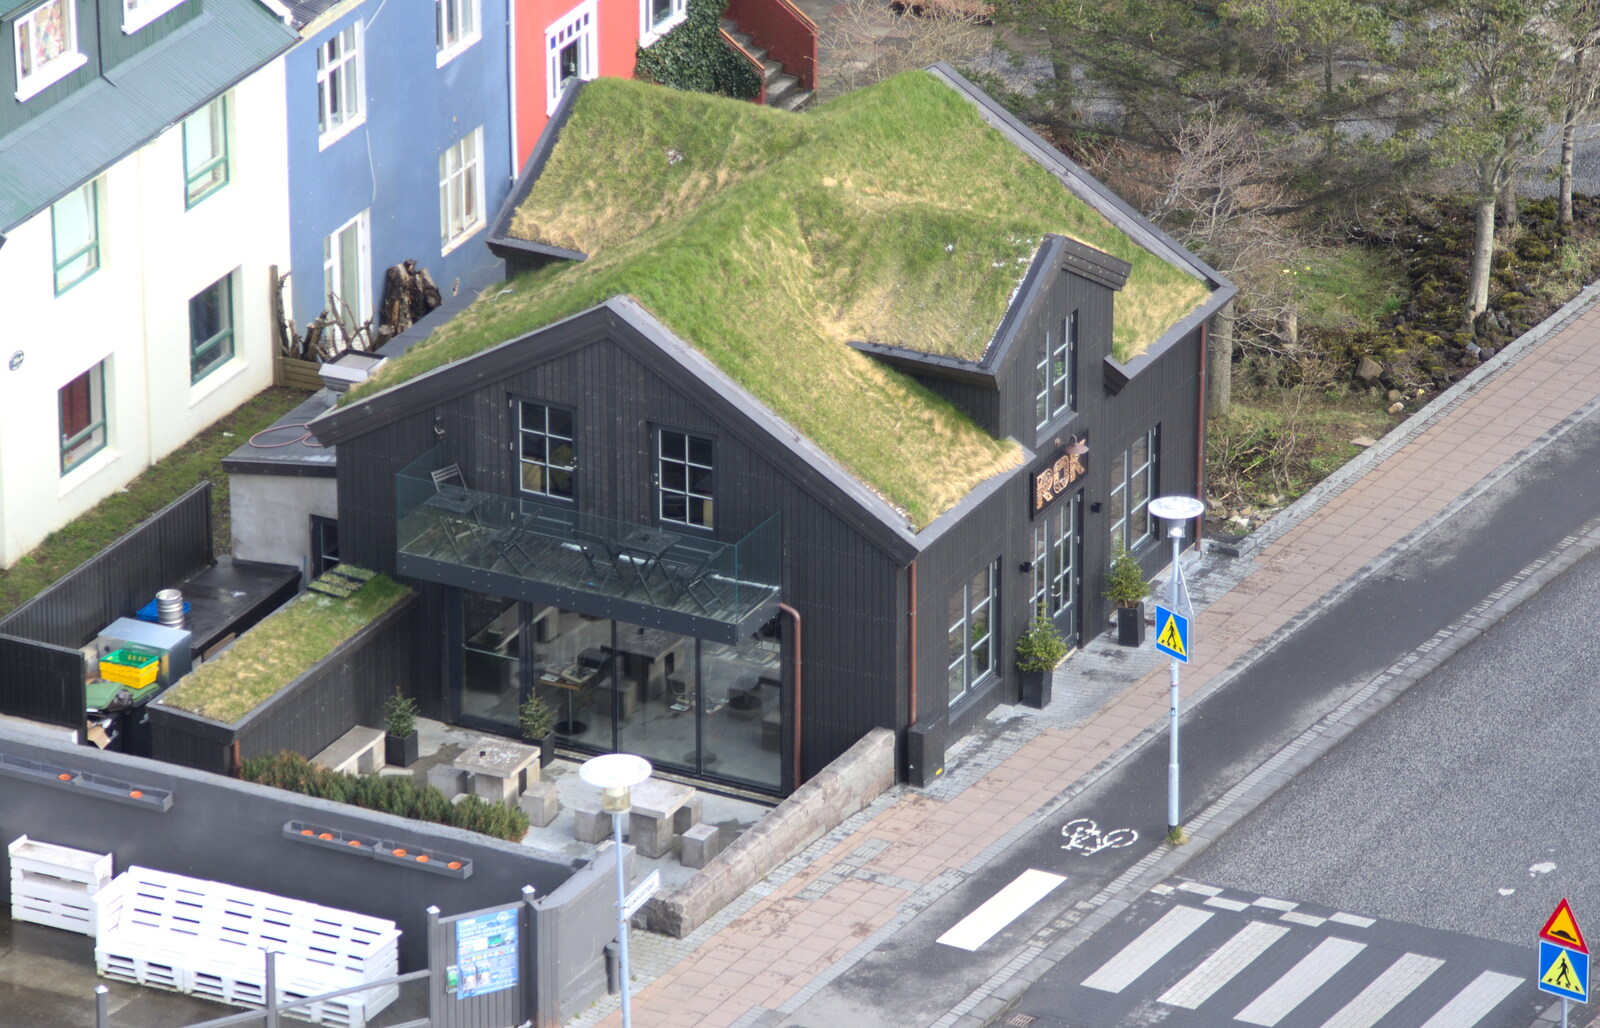 Last night's bar has grass for a roof from Hallgrímskirkja Cathedral and Whale Watching, Reykjavik - 21st April 2017